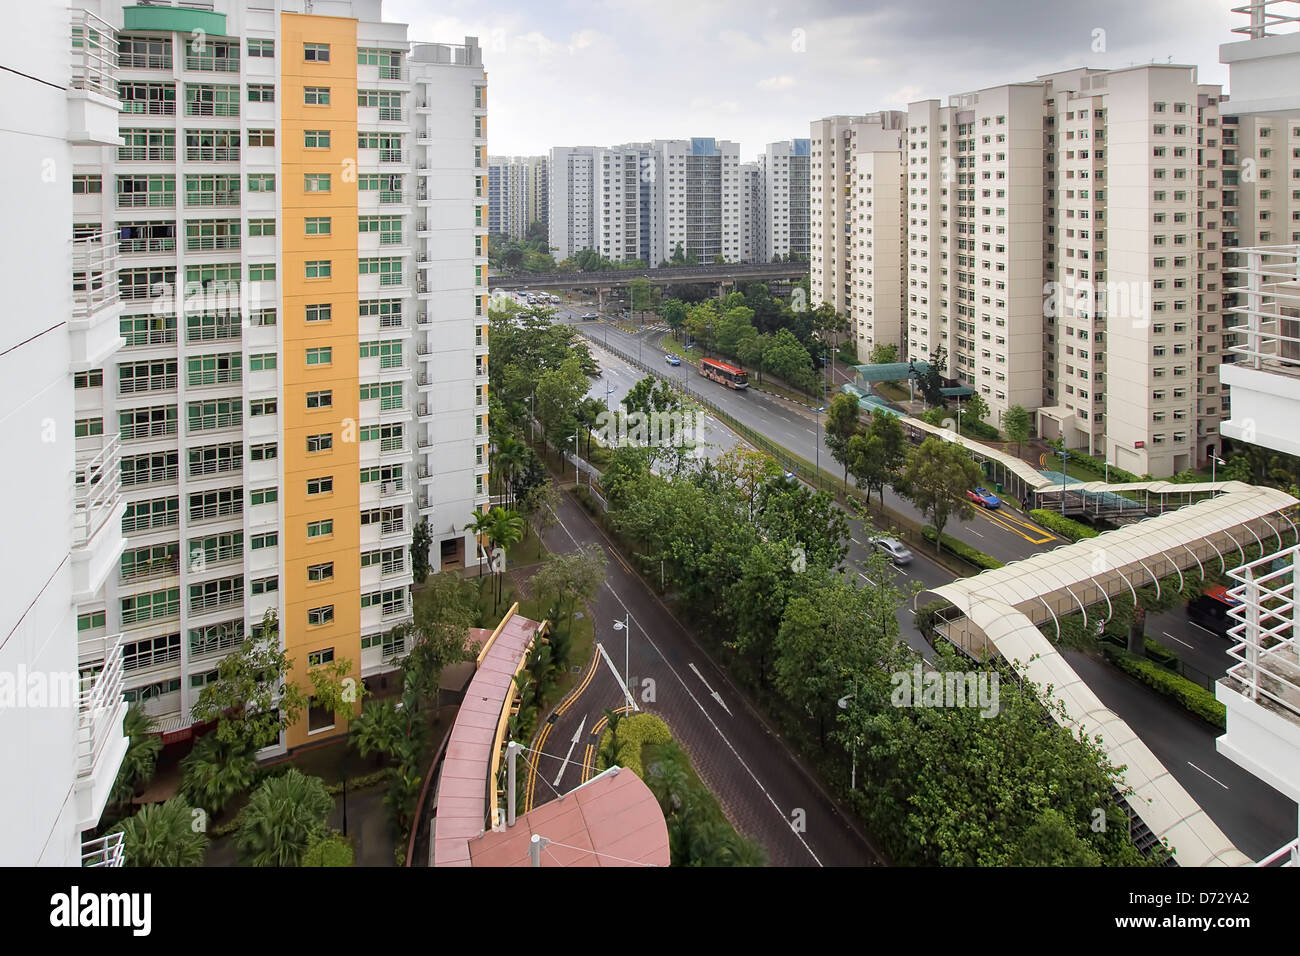 Singapore Government Housing Development in Punggol District Stock Photo